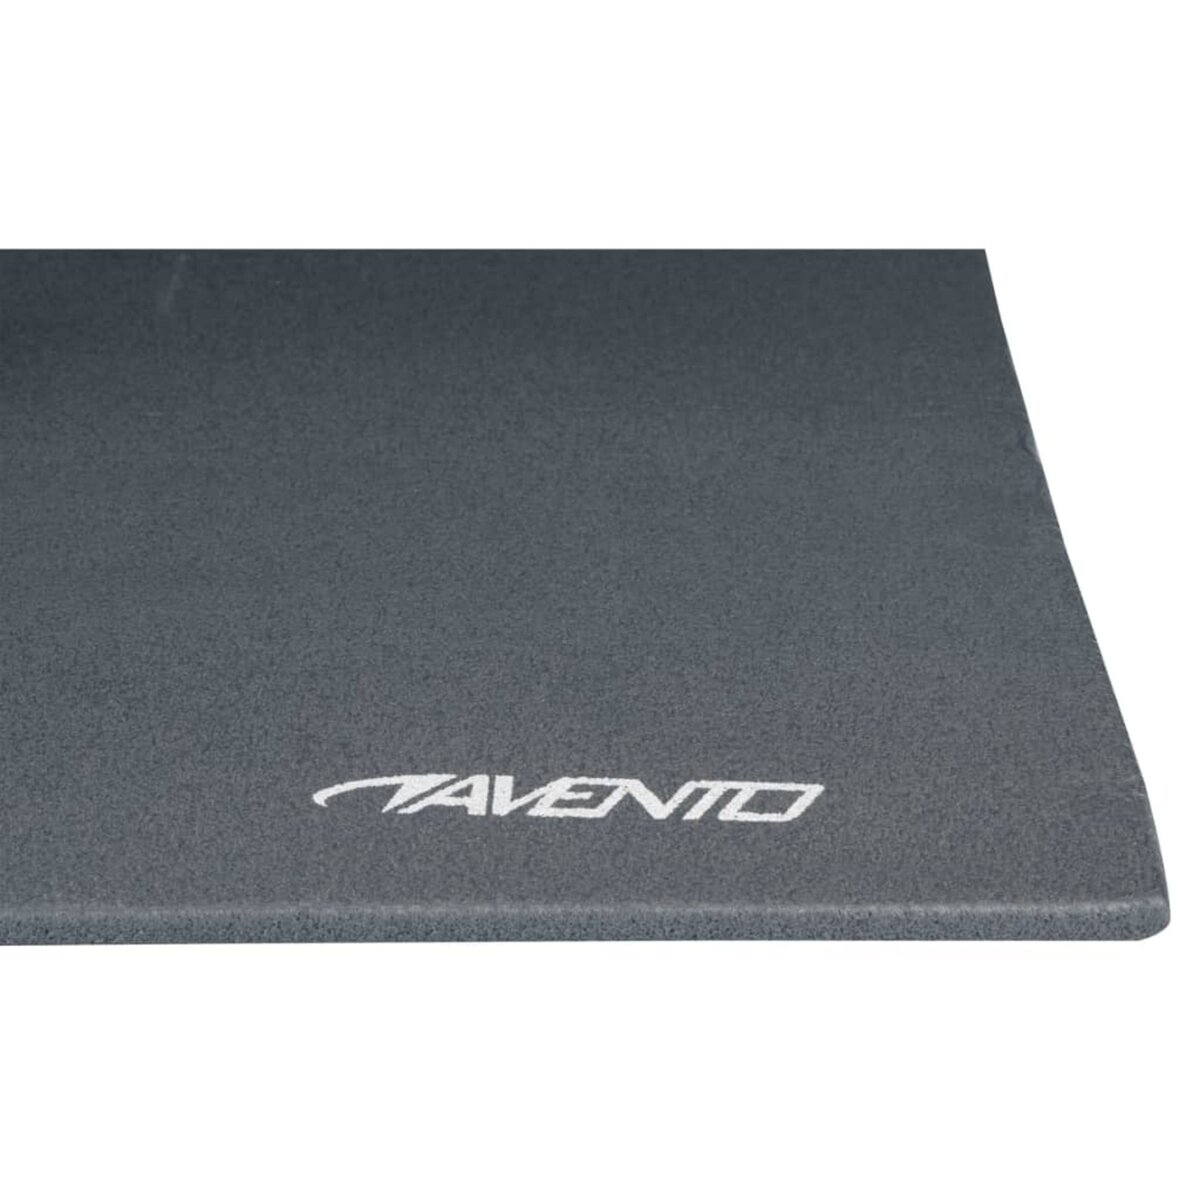 AVENTO Avento Tapis d'exercice multifonctionnel XPE Gris